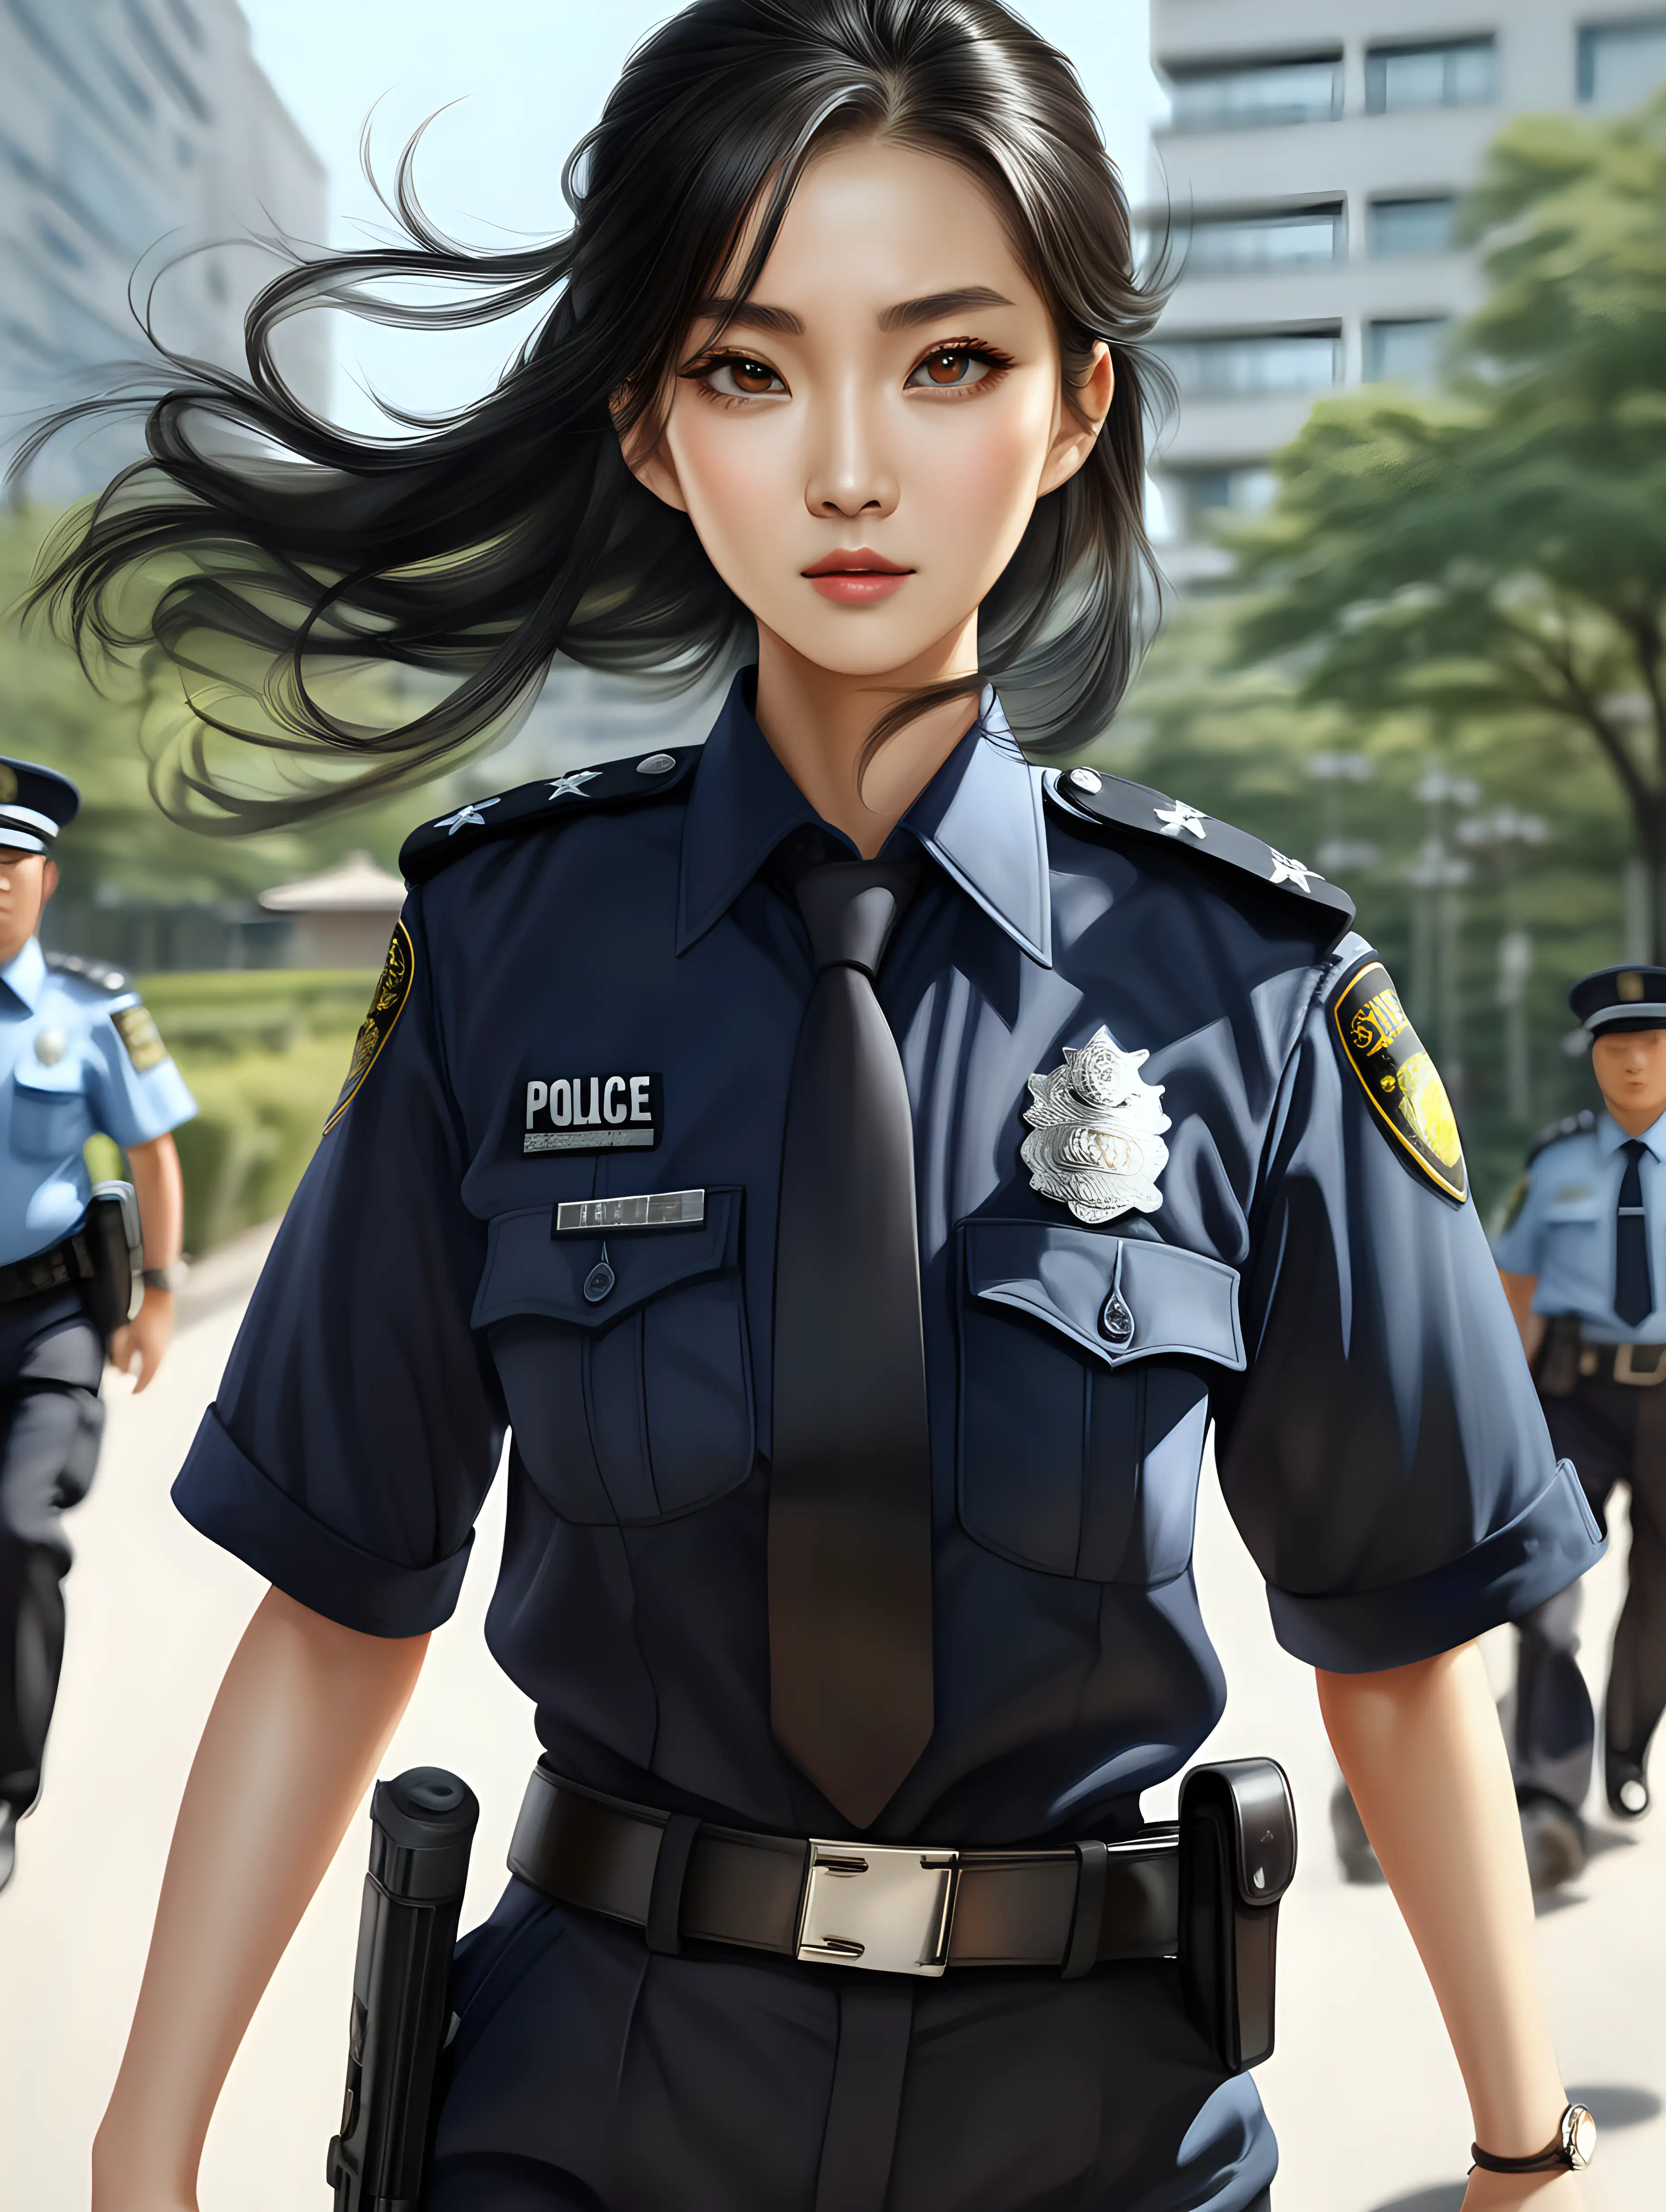 Fiery Chinese Policewoman Chasing Criminals in HD 4K Under Summer Sunlight